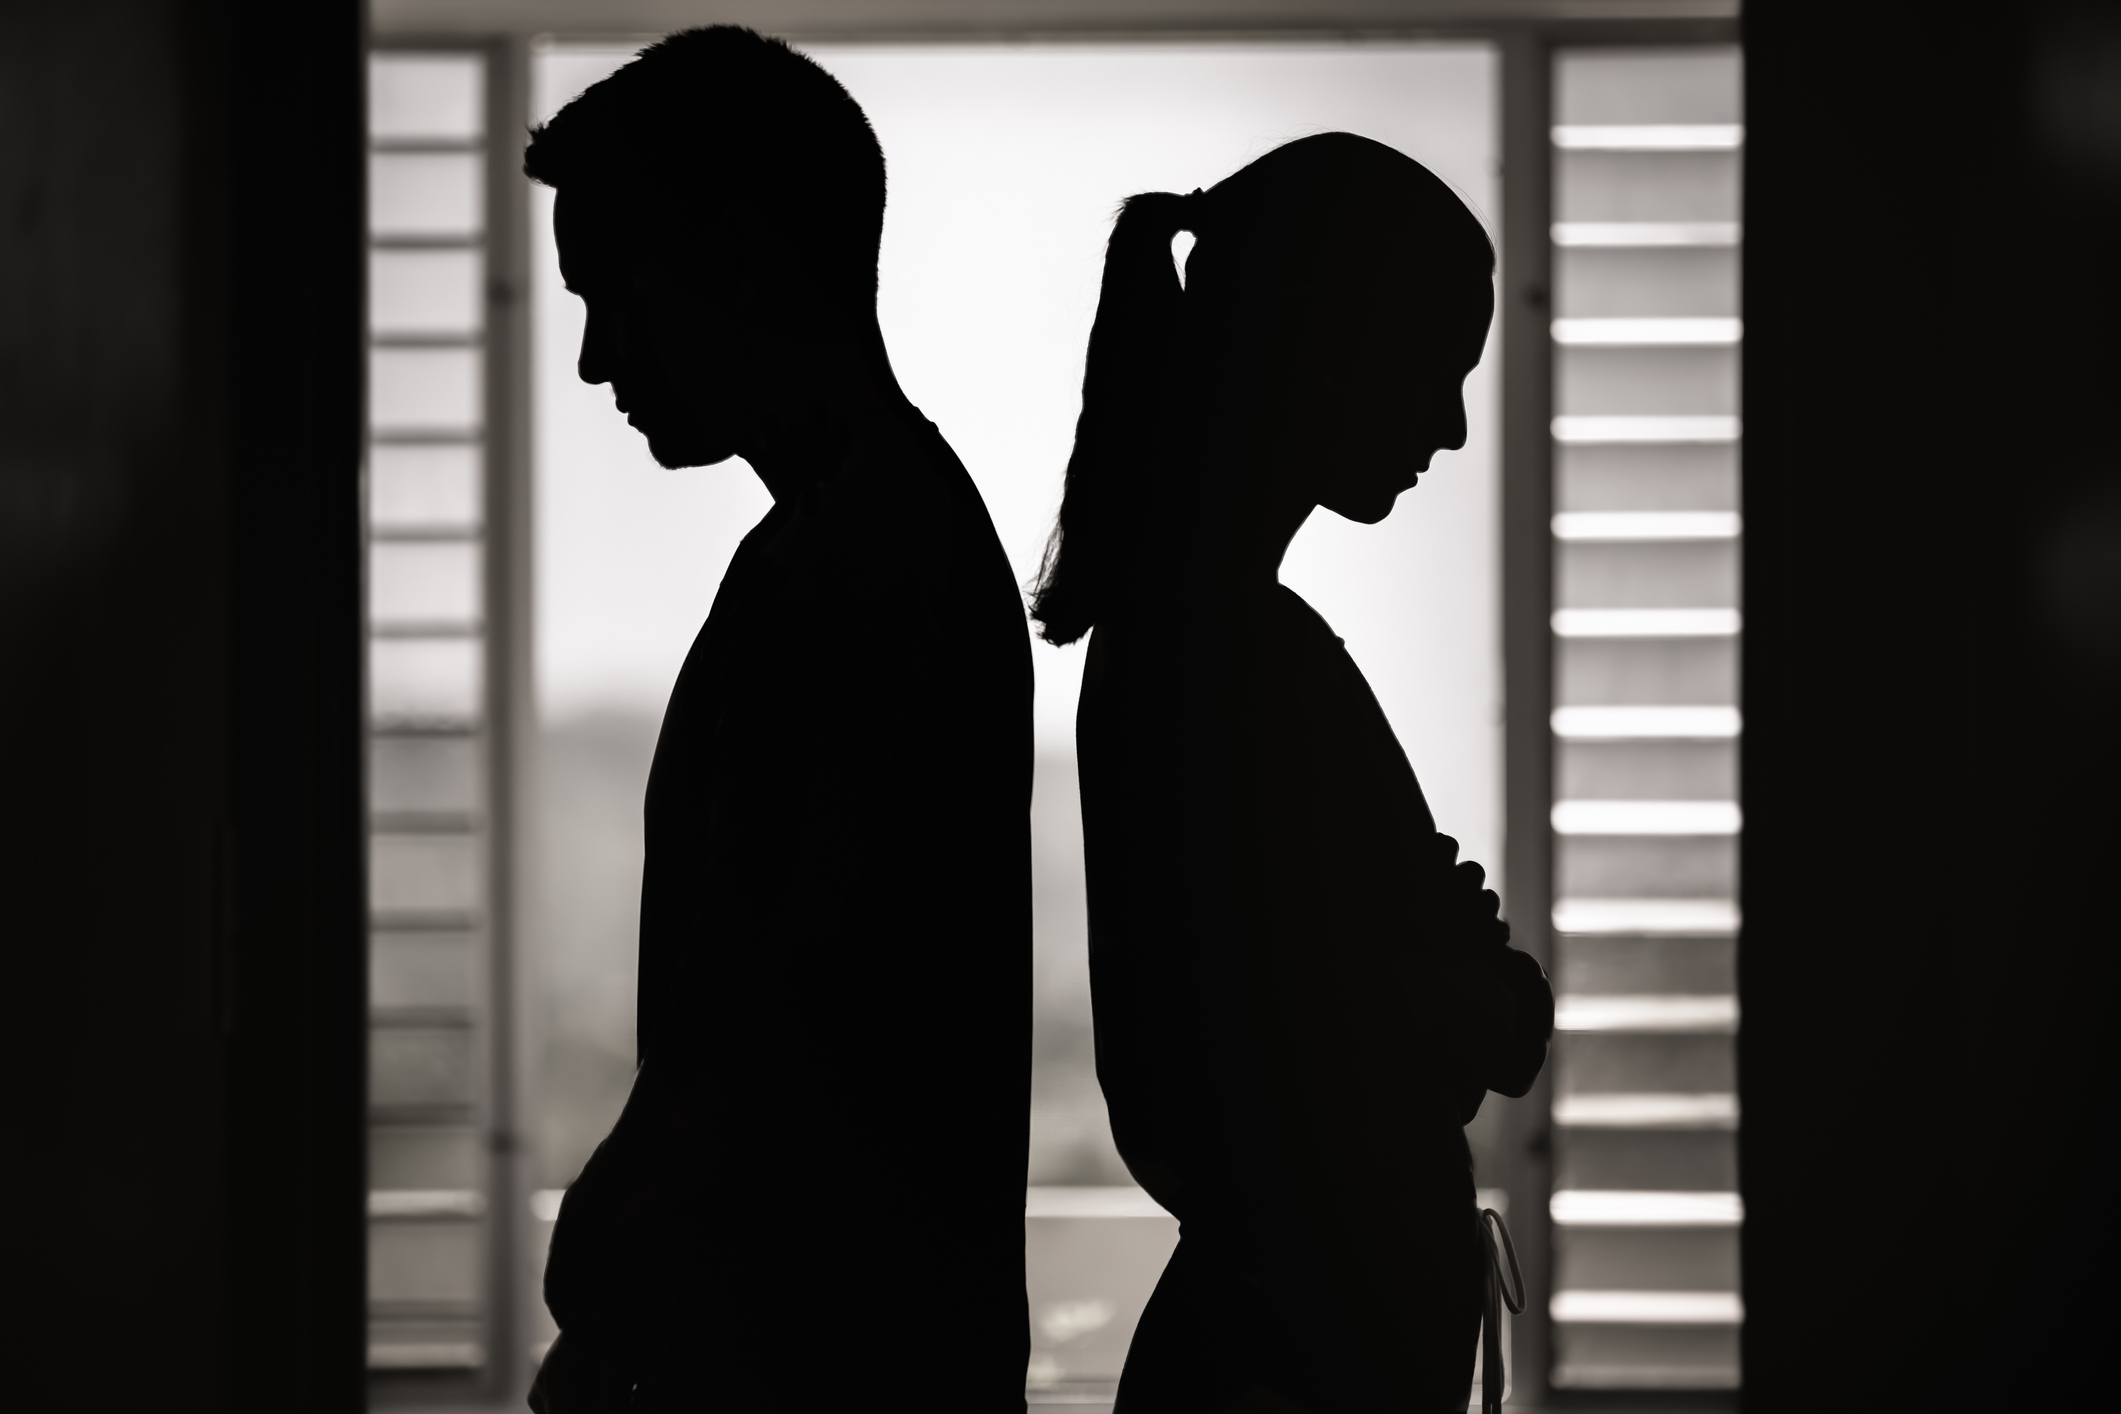 Silhouettes of a man and woman standing back to back in front of window blinds